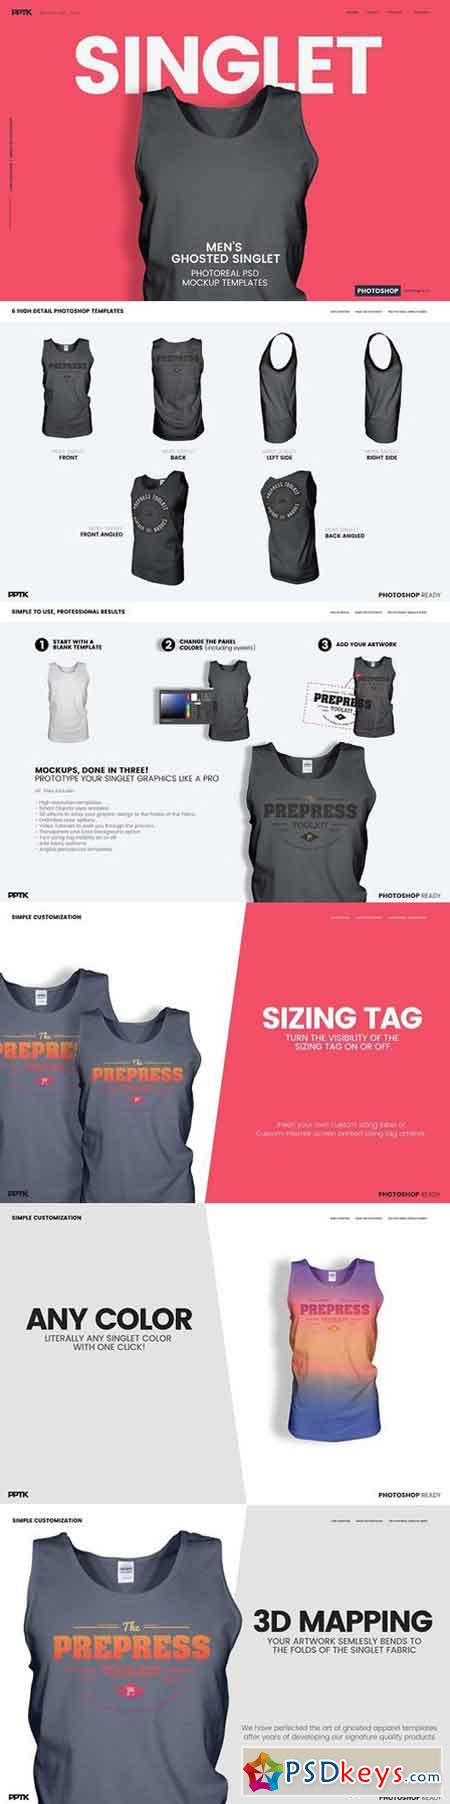 Men's Ghosted Singlet Templates 1278430